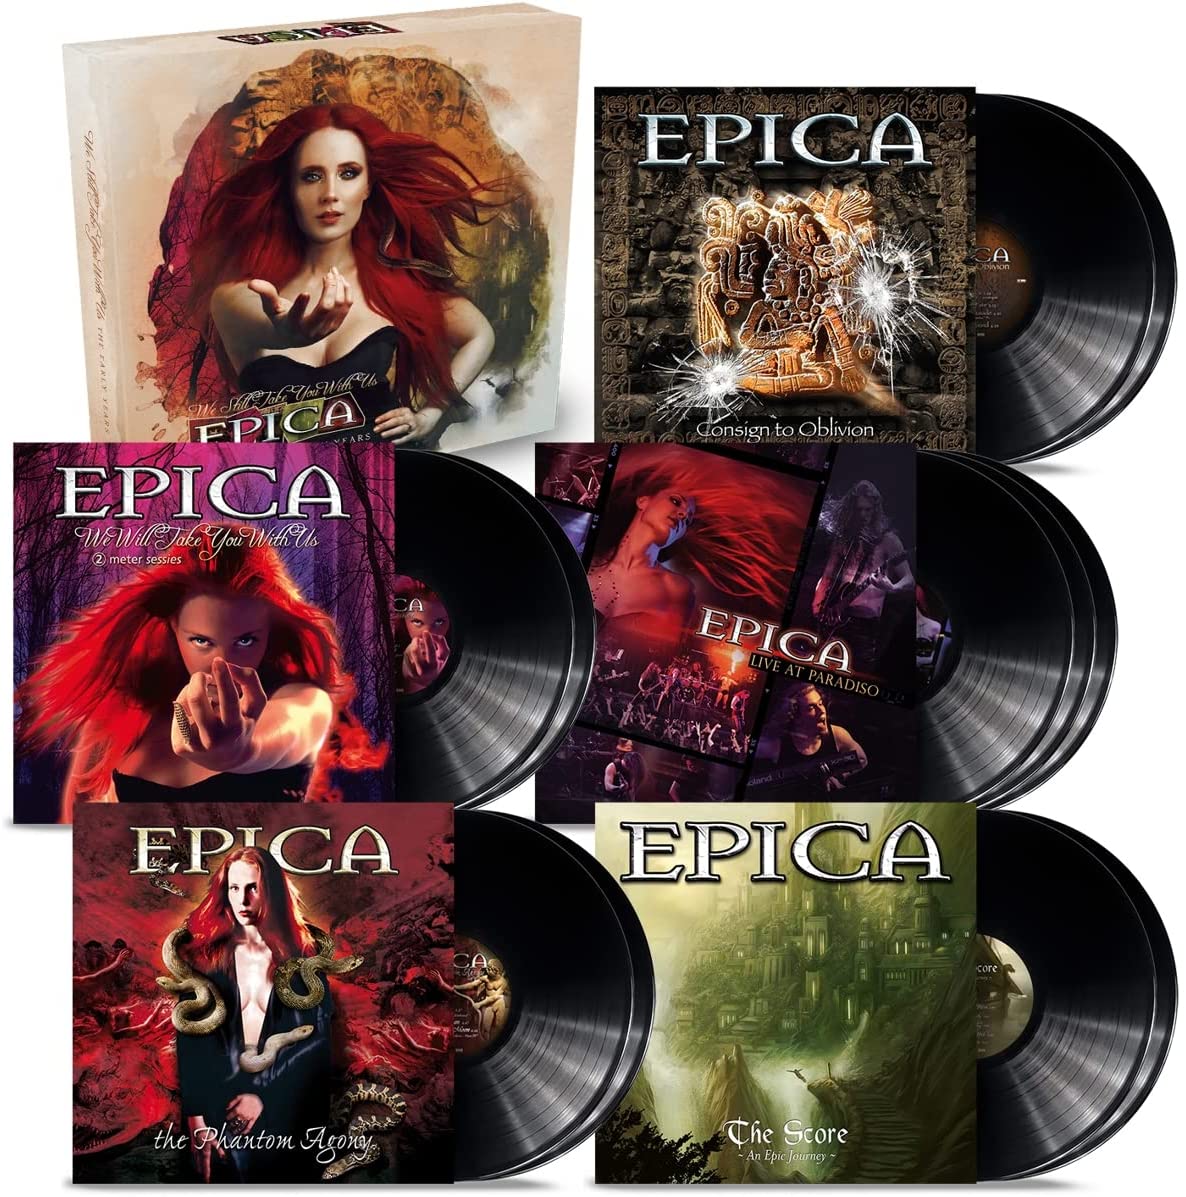 Epica "We Still Take You With Us" Limited 11 x 12" Vinyl Box Set